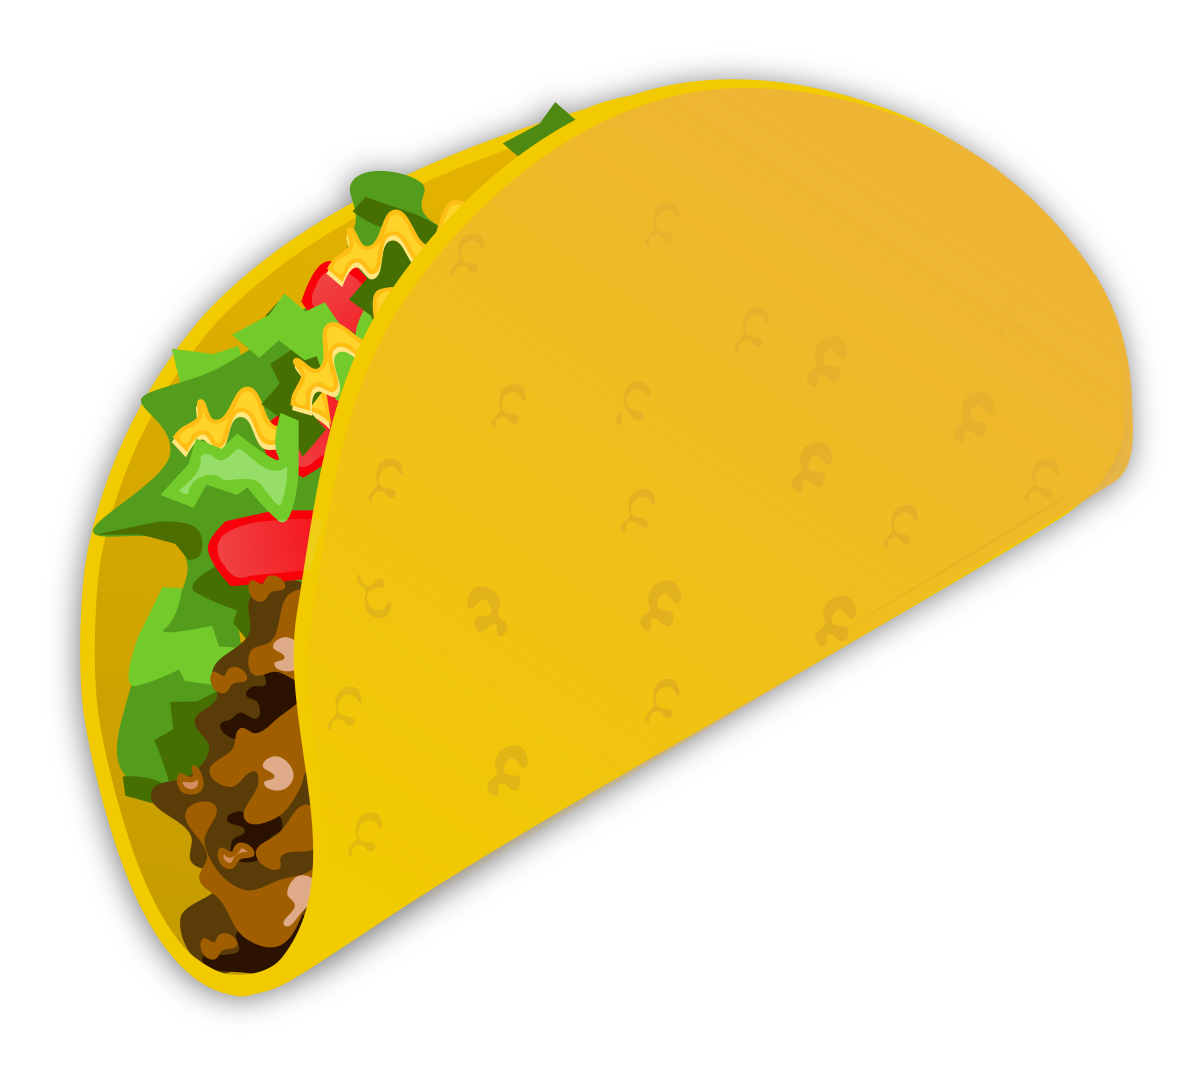 Download File:Taco.svg - Wikimedia Commons